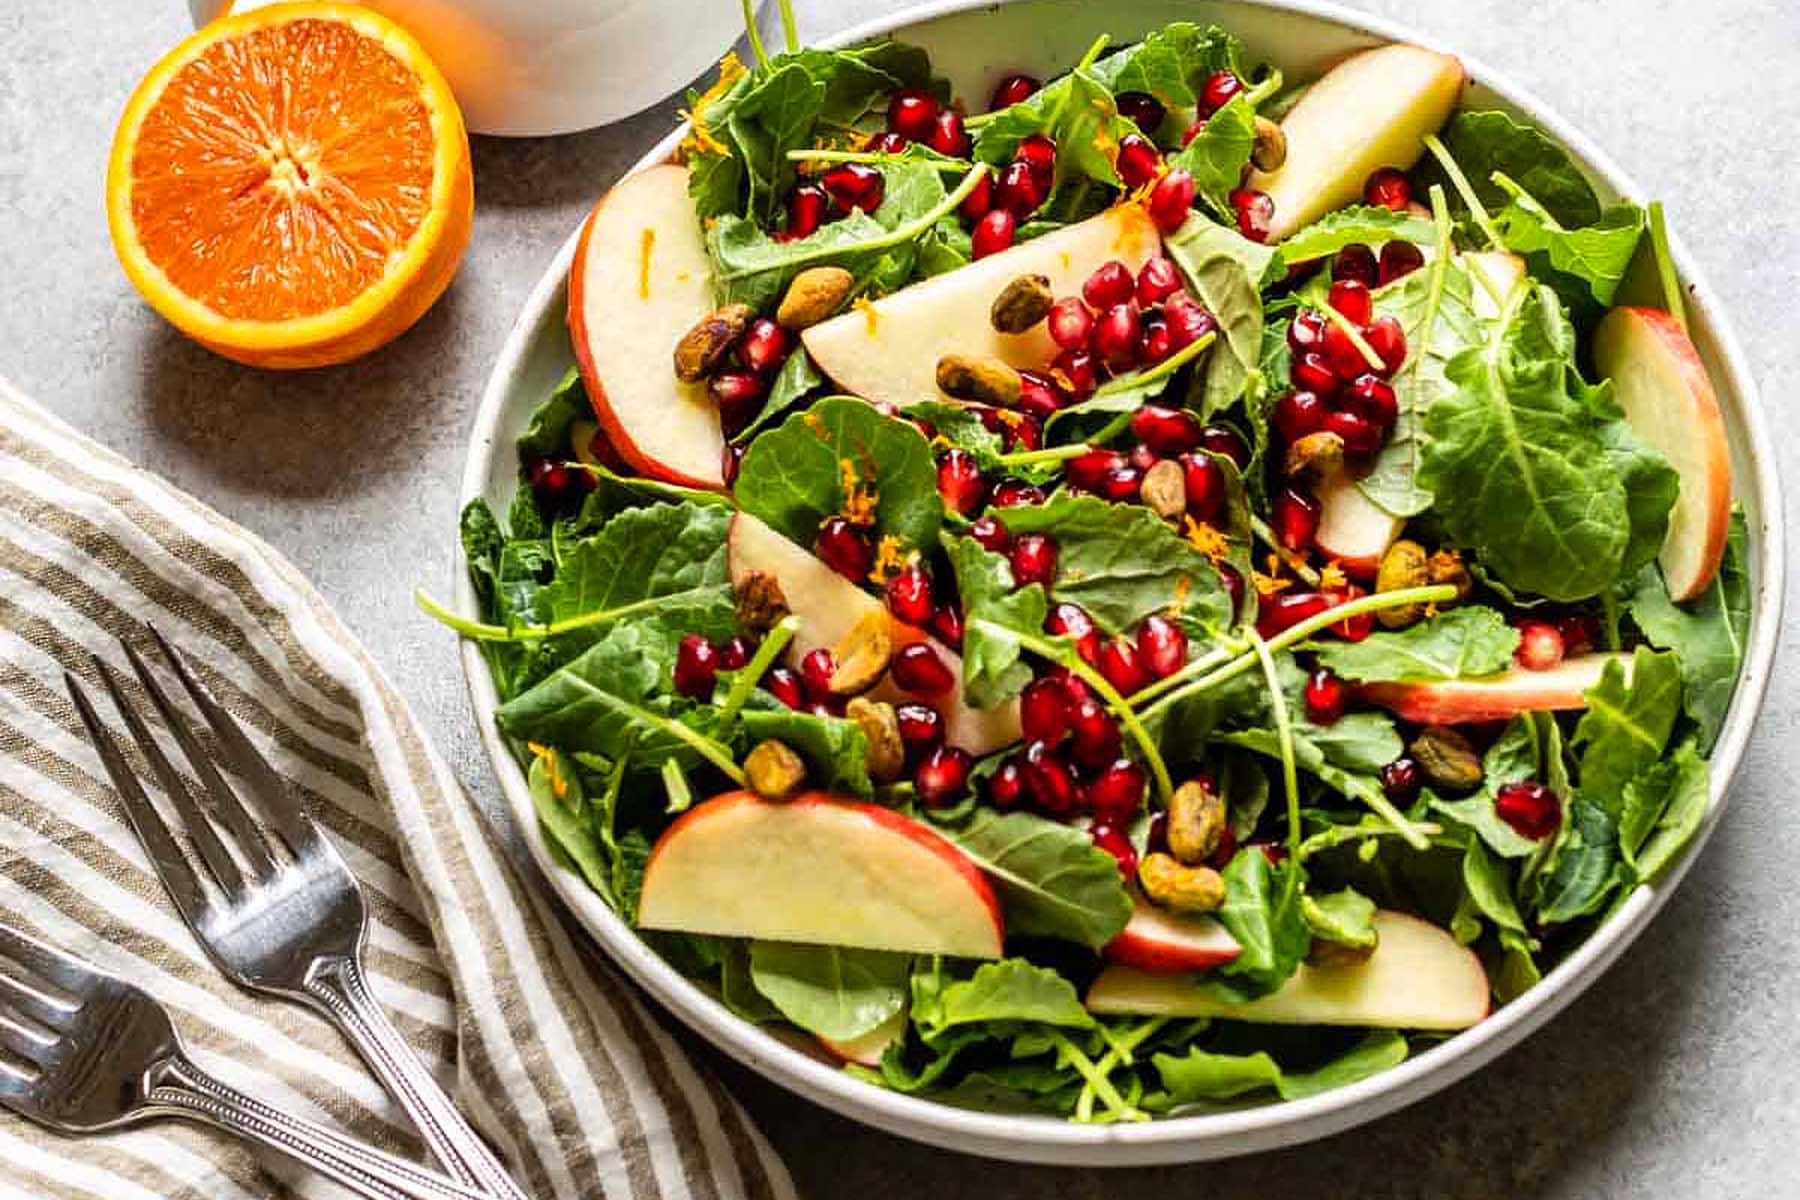 A bowl of spinach salad with apples and pomegranate.